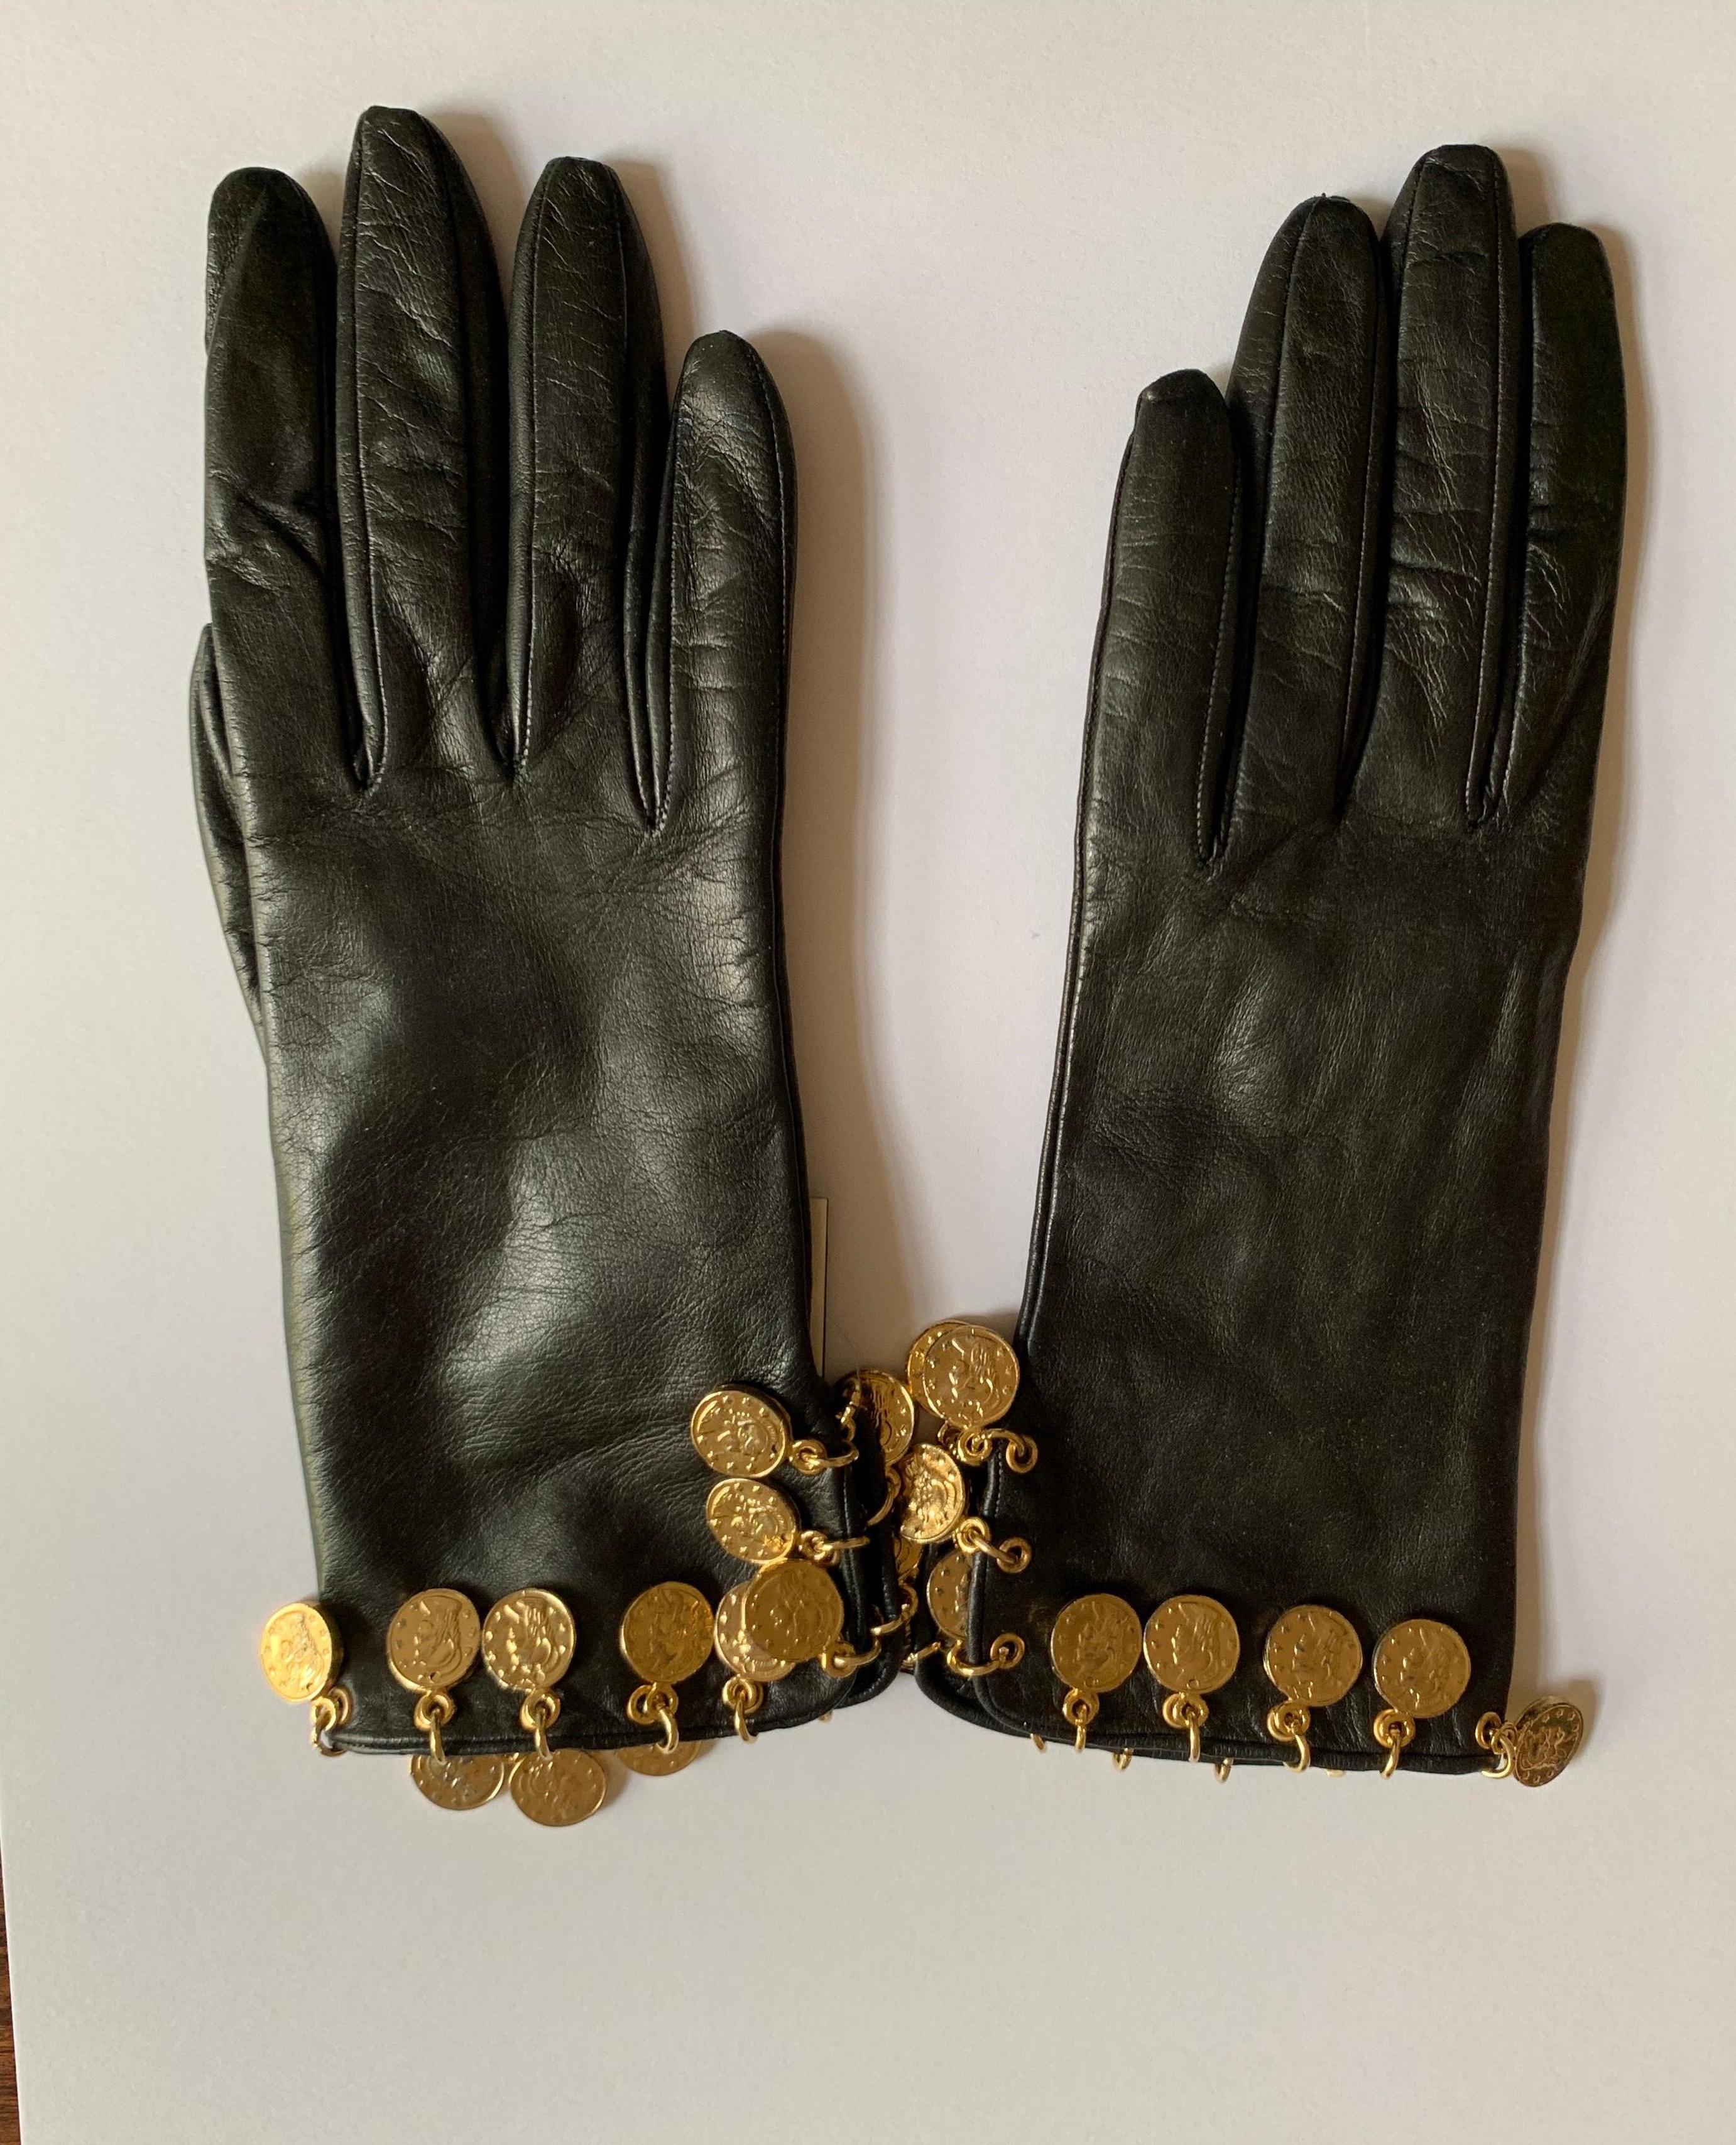 Vintage Moschino black leather gloves with cuffs adorned with dangling Roman coin inspired gold tone charms. 

Leather, lined in silk. 

Made in Italy.

Size 7 1/2, best fits small.

Very good condition, unworn with tags still attached, faint